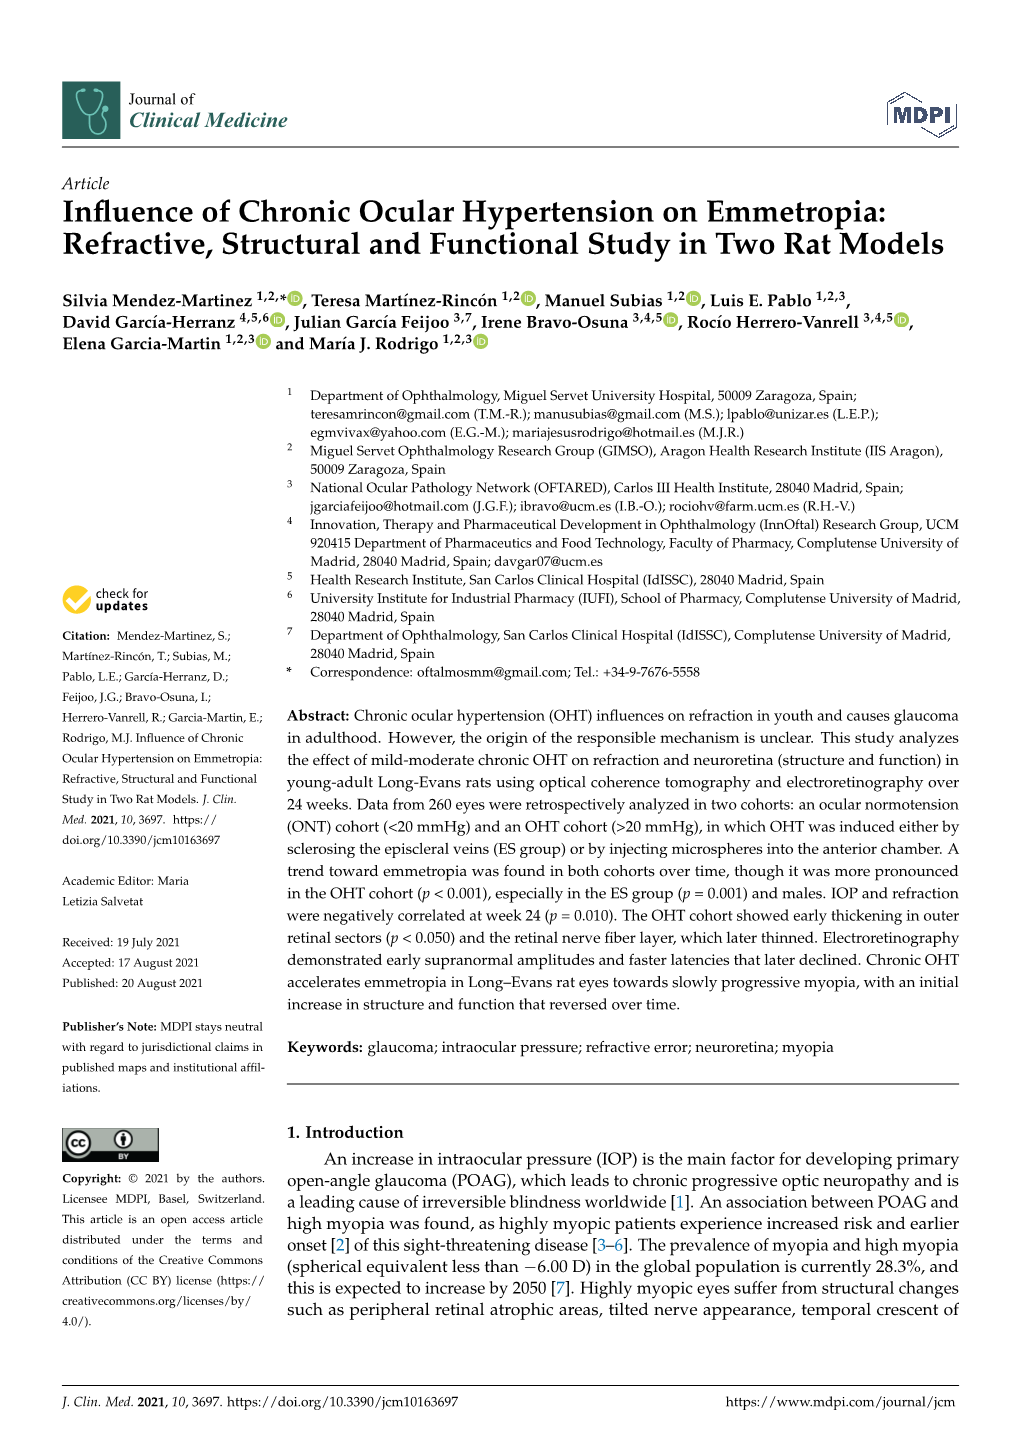 Refractive, Structural and Functional Study in Two Rat Models